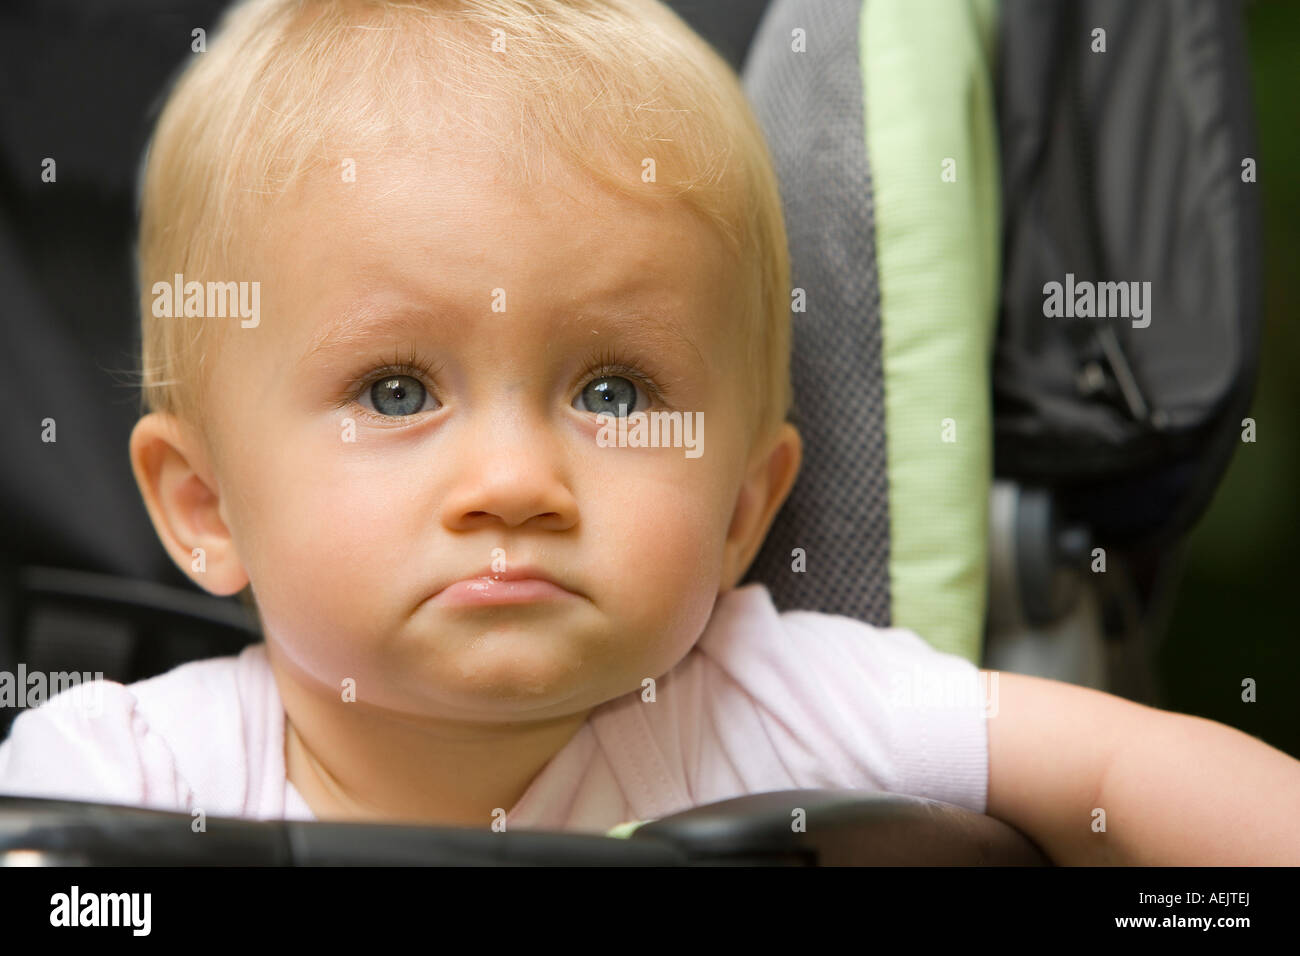 A 10 month old baby girl in a baby carriage Stock Photo